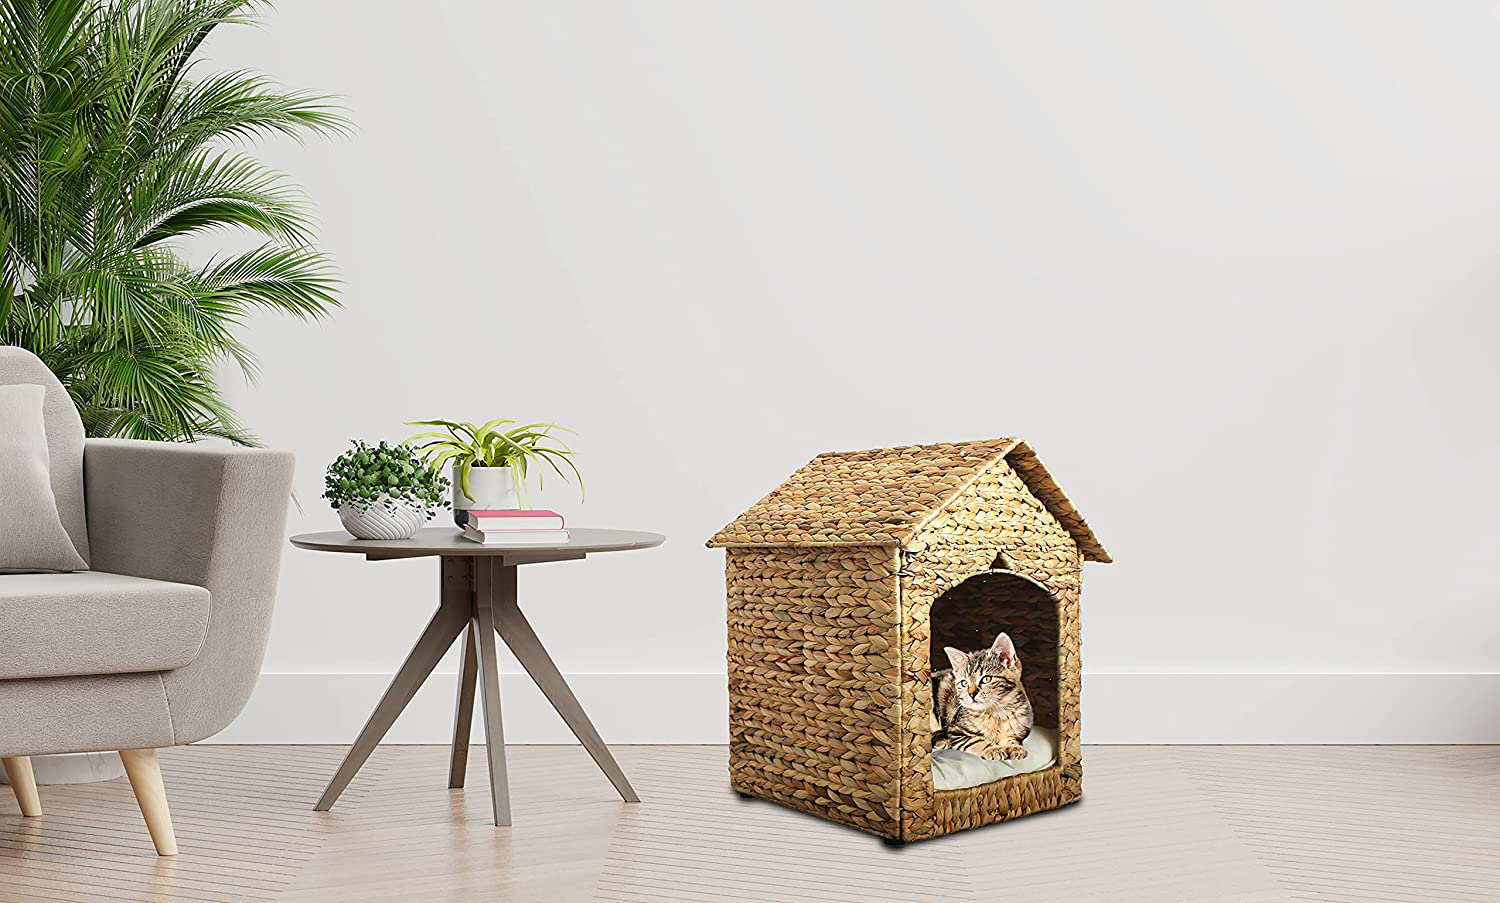 B.U.STYLE Ecofriendly Pet House Indoor, Foldable Puppy Bed, Cat Dog Housewater Hyacinth House for Indoor Used, and Natural Soft Cushion, Natural Color, 16.1Inl X 15.7W X 18.9Hin Animals & Pet Supplies > Pet Supplies > Dog Supplies > Dog Houses B.U.STYLE   